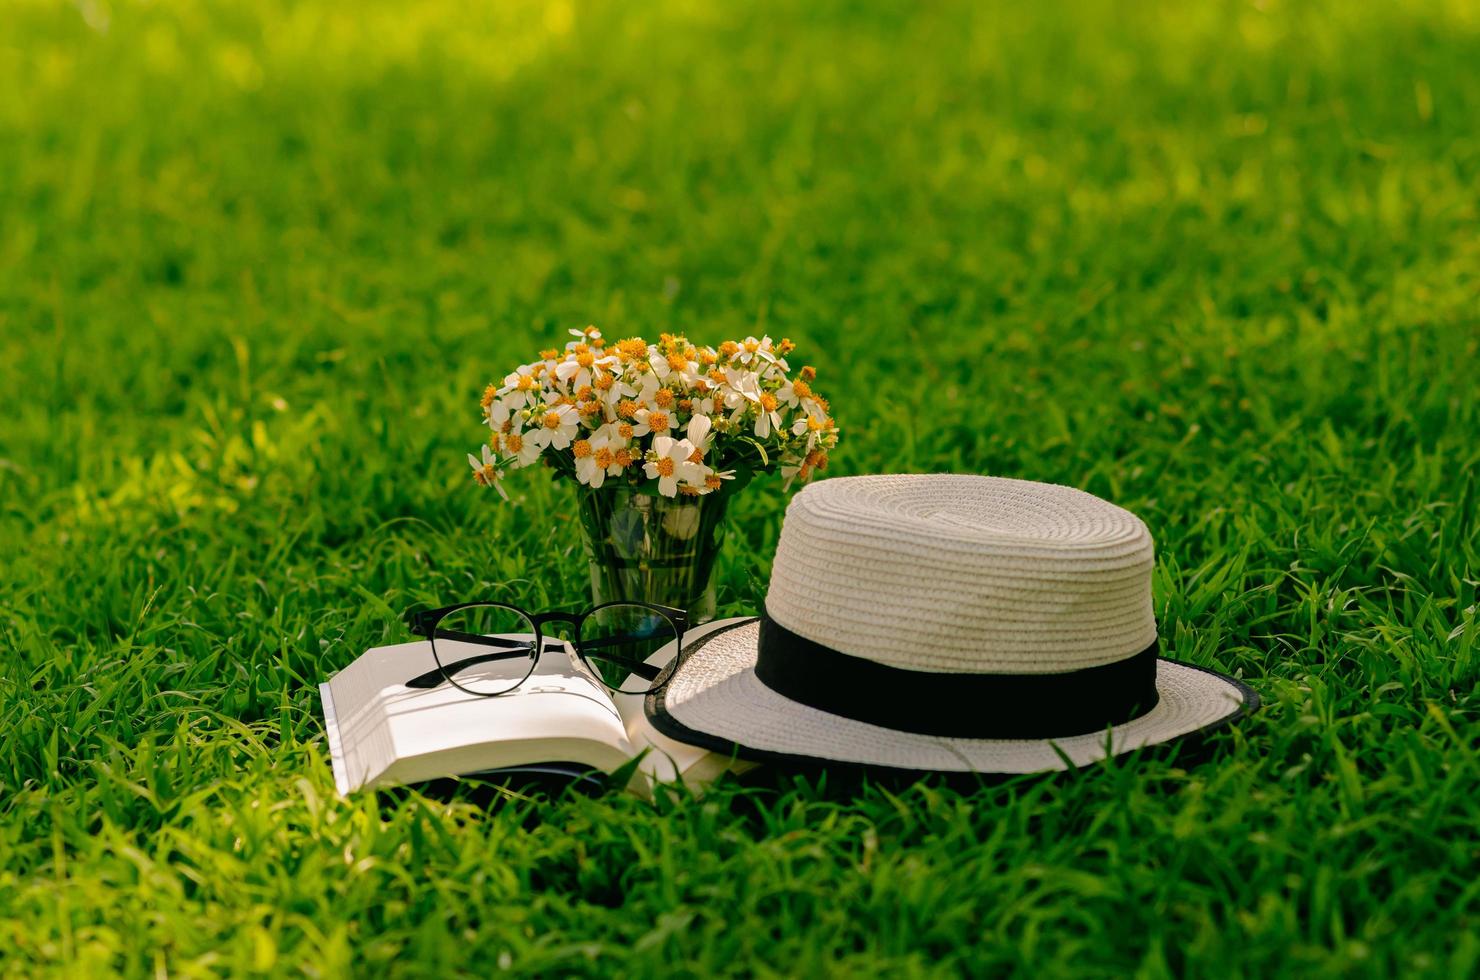 Leisure in the garden with book, straw hat, and flowers on the lawn. photo